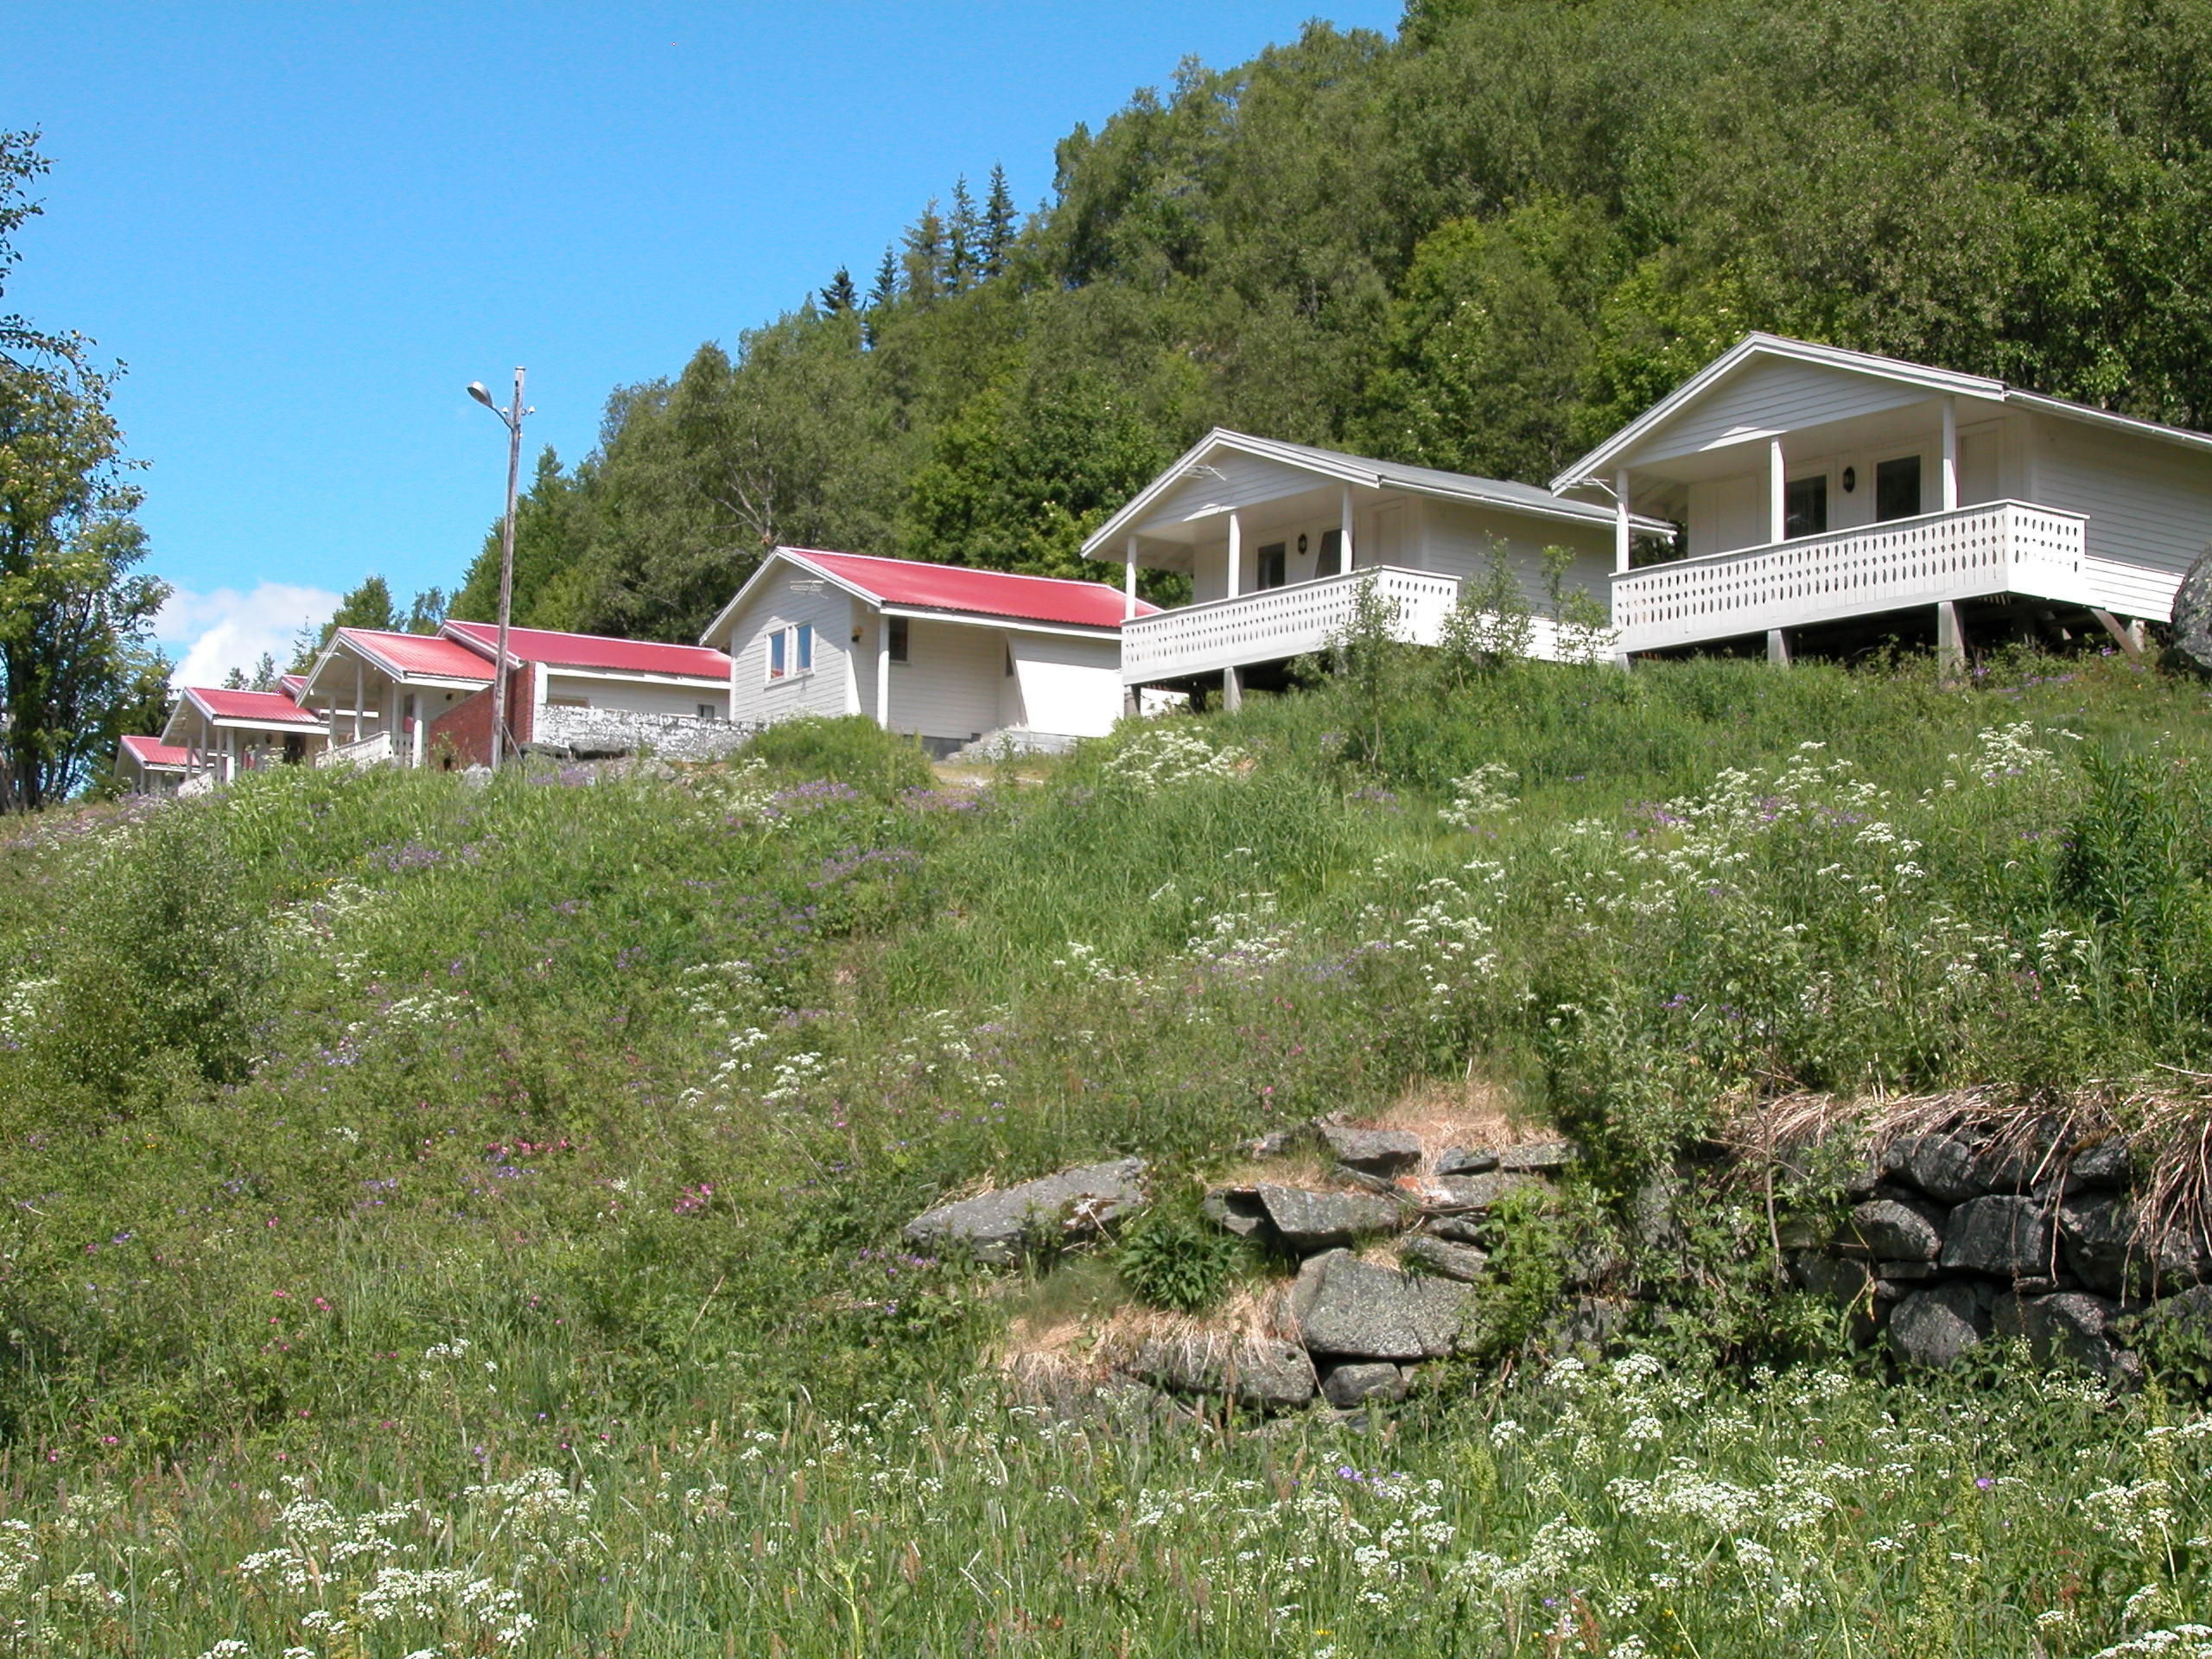 Nearby accommodations